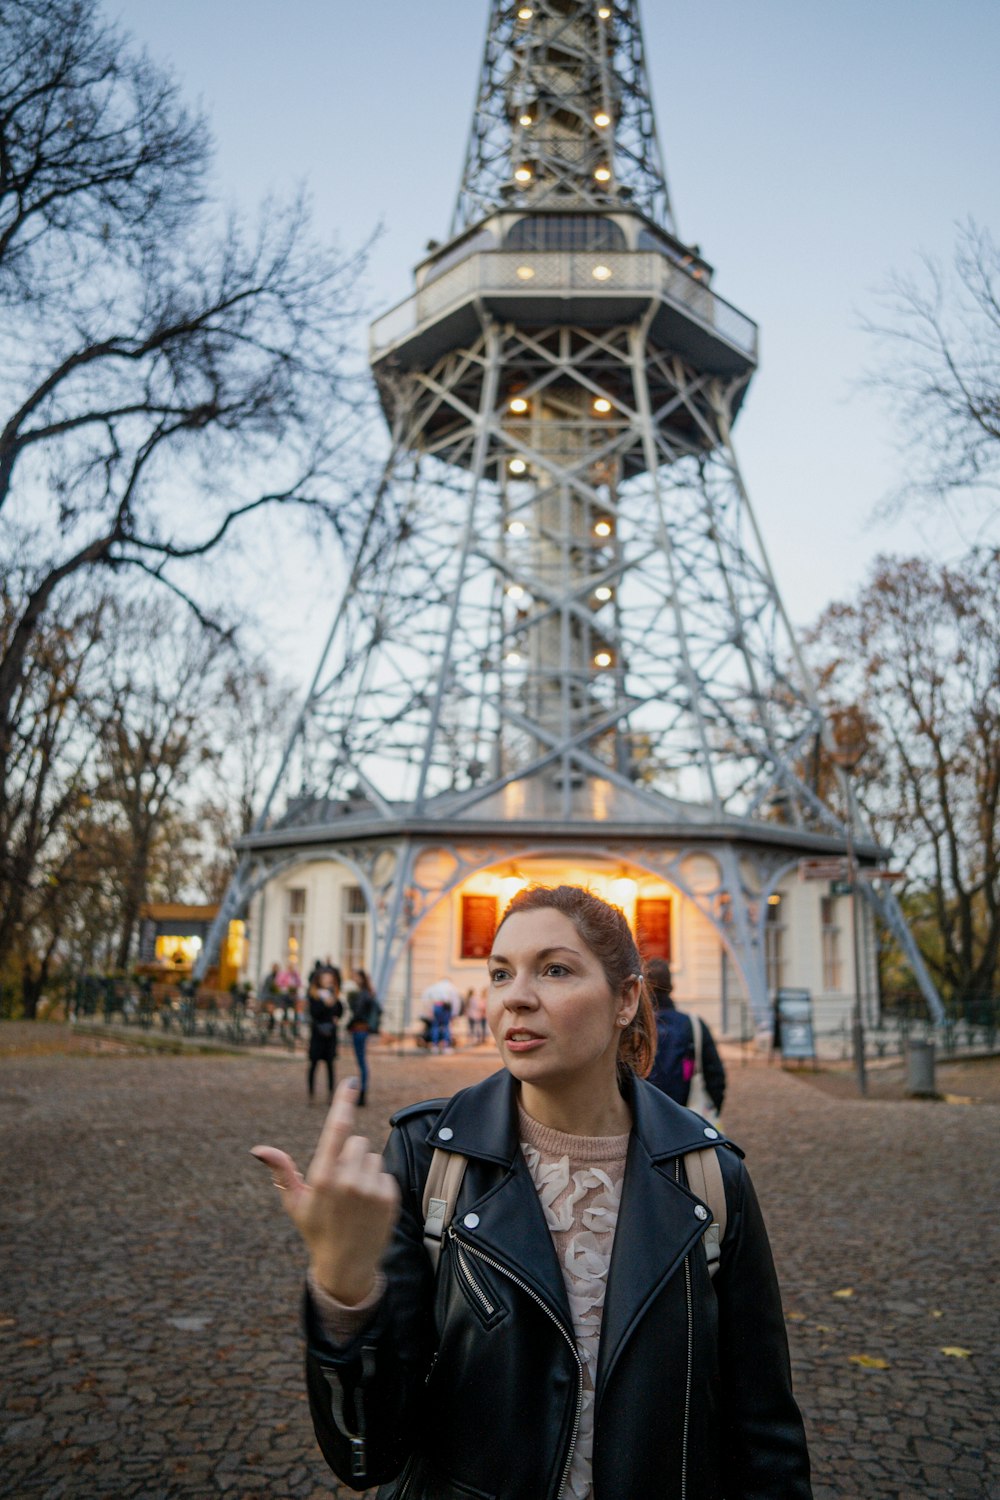 a person posing in front of a tall tower